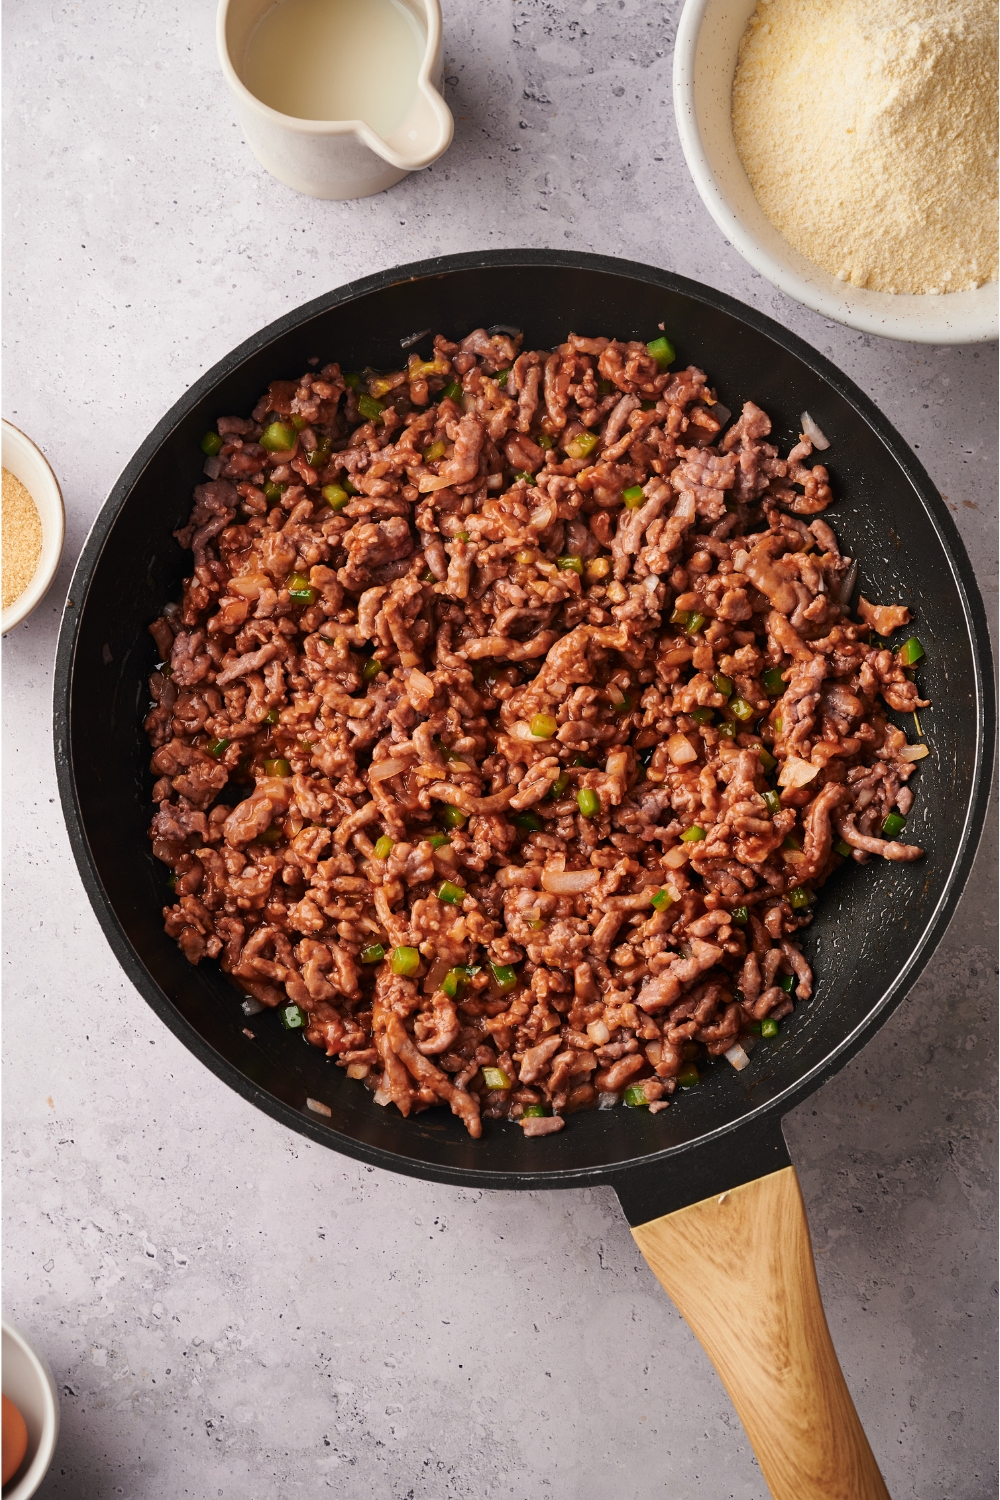 A skillet filled with cooked and seasoned ground beef mixed with peppers and onions.